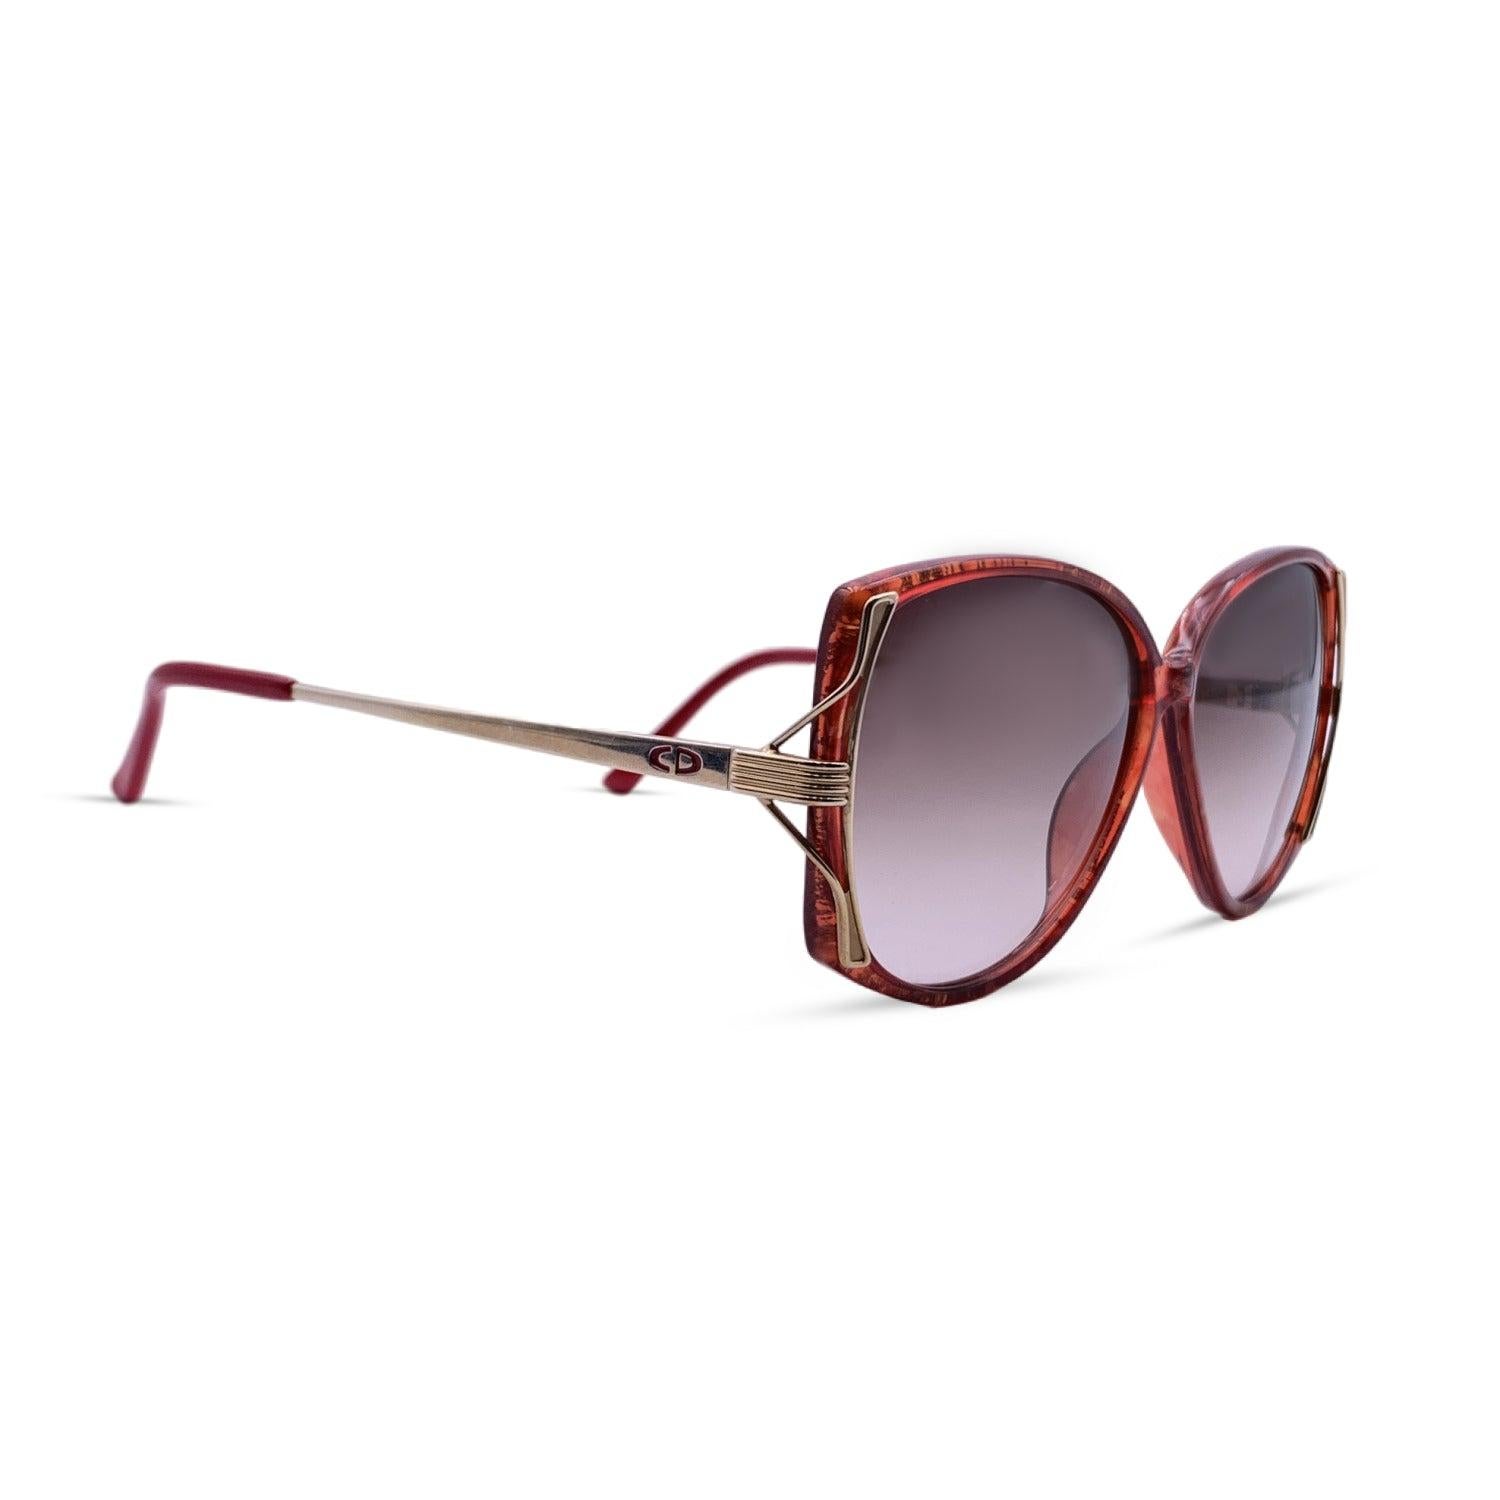 Christian Dior Vintage Women Sunglasses 2529 30 Optyl 57/11 135mm In Excellent Condition For Sale In Rome, Rome